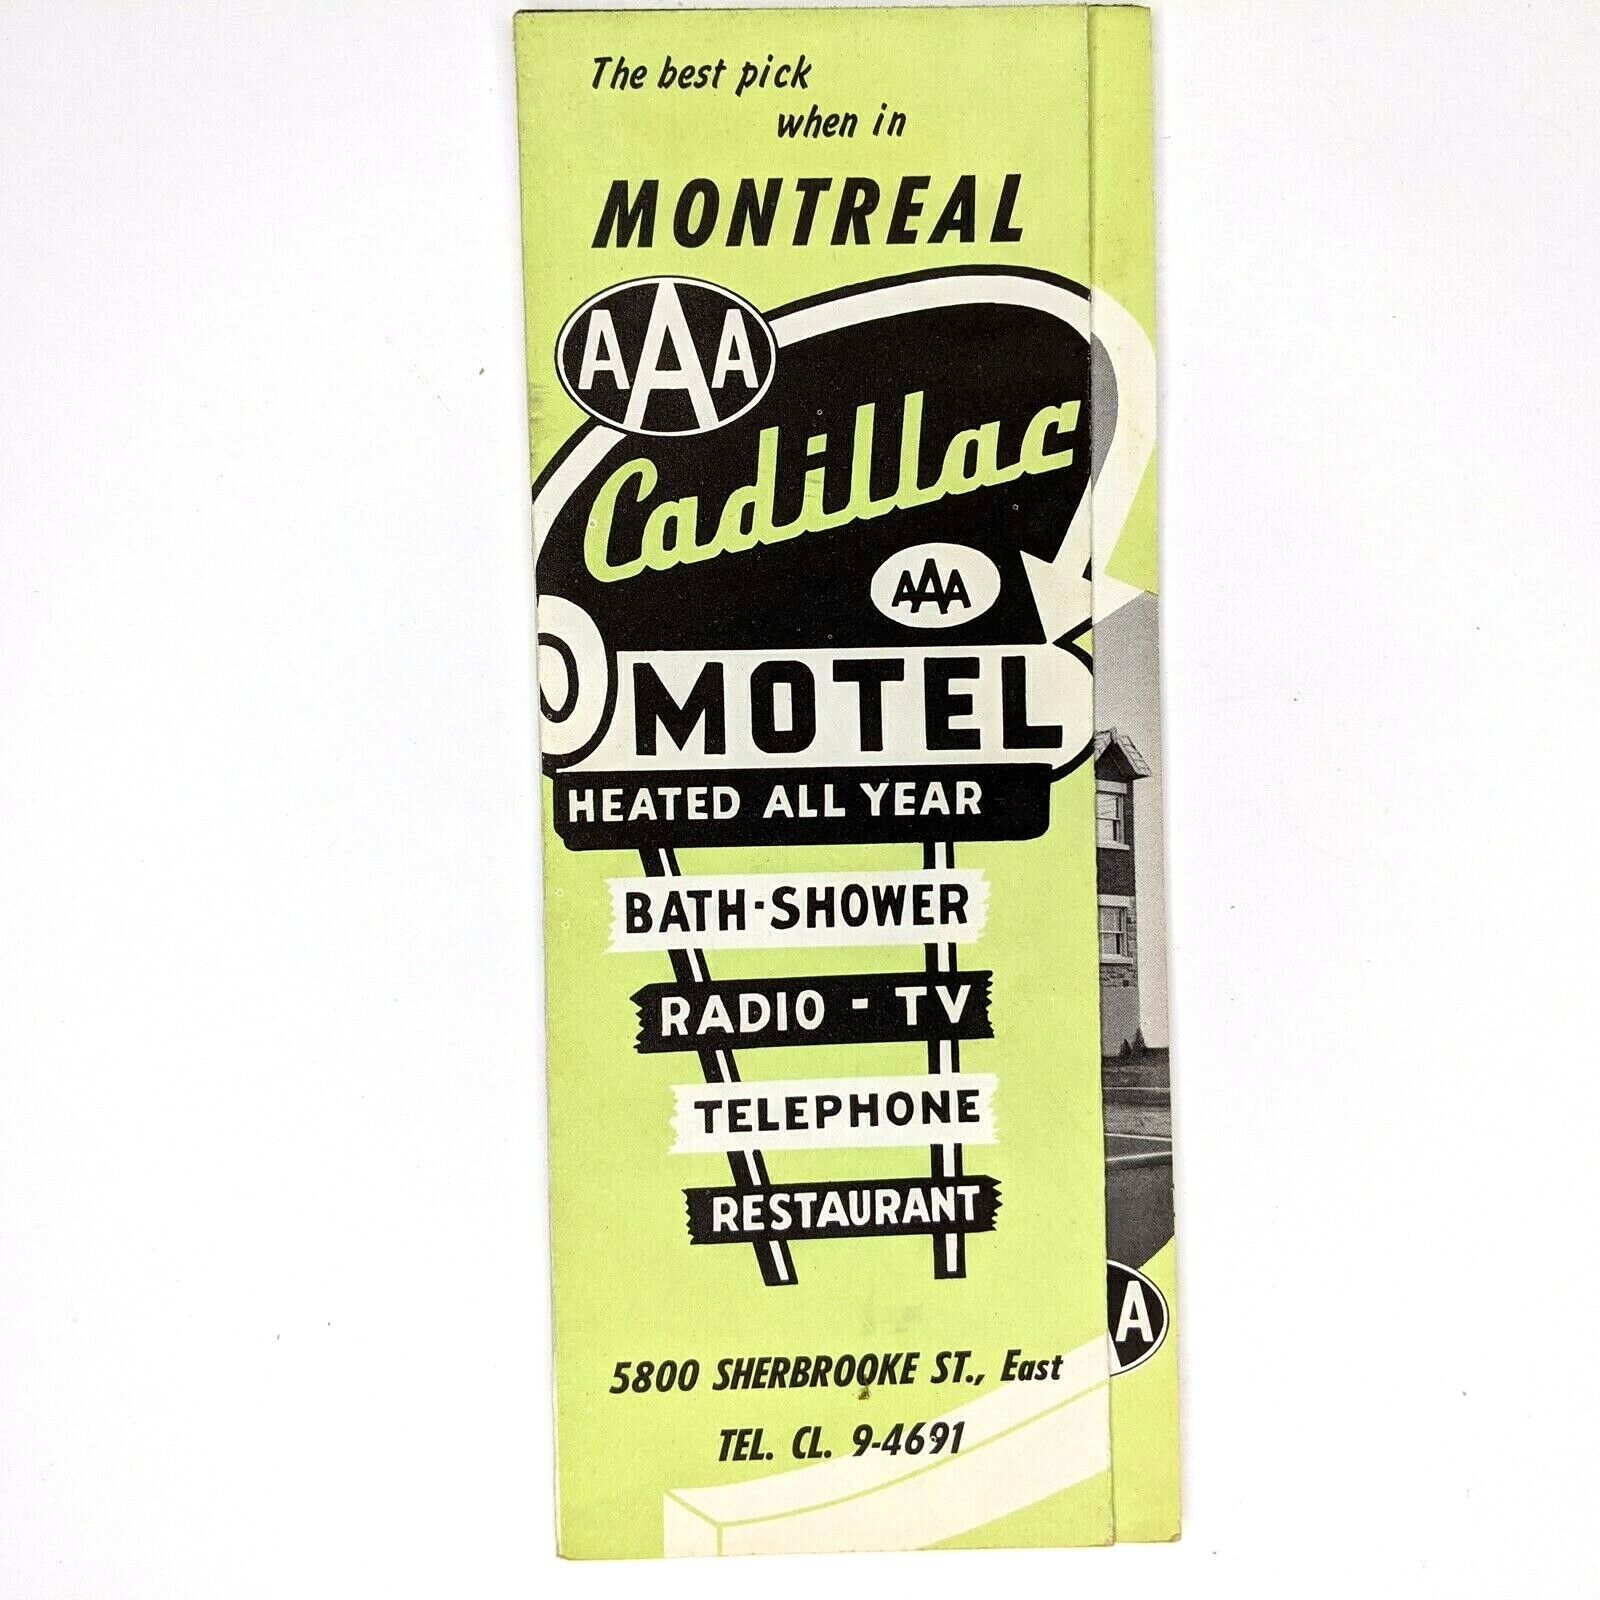 c1950s Downtown Montreal Cadillac Motel Advertising Brochure Travel Mid Mod 2F